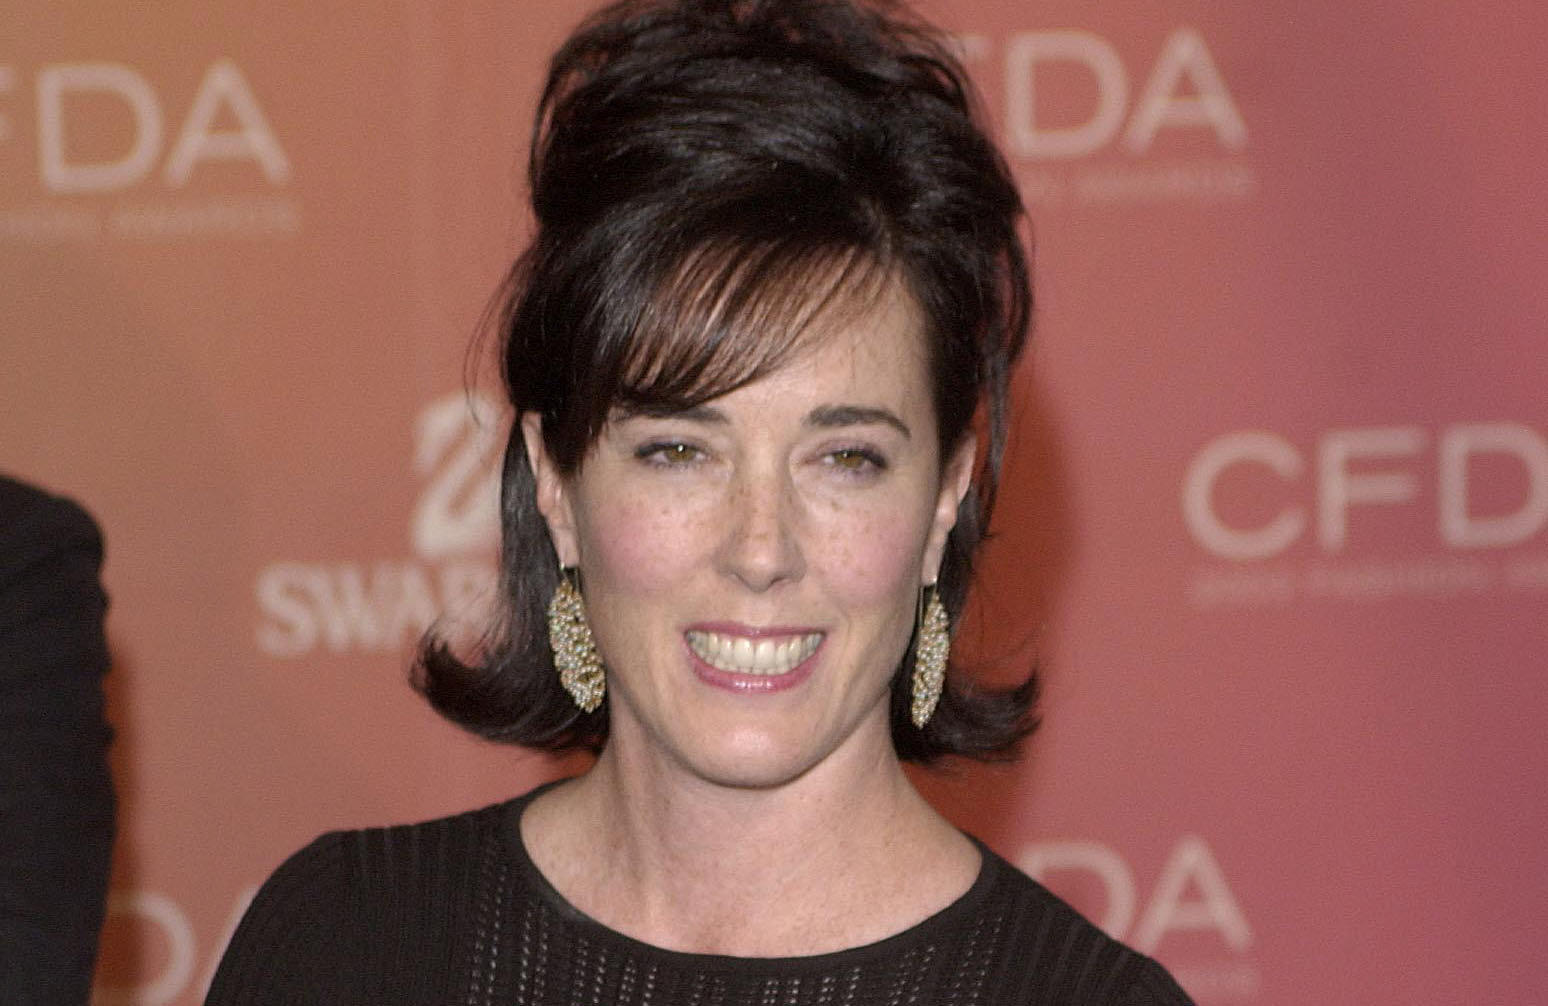 Kate Spade's death prompts questions about bipolar disorder - CBS News